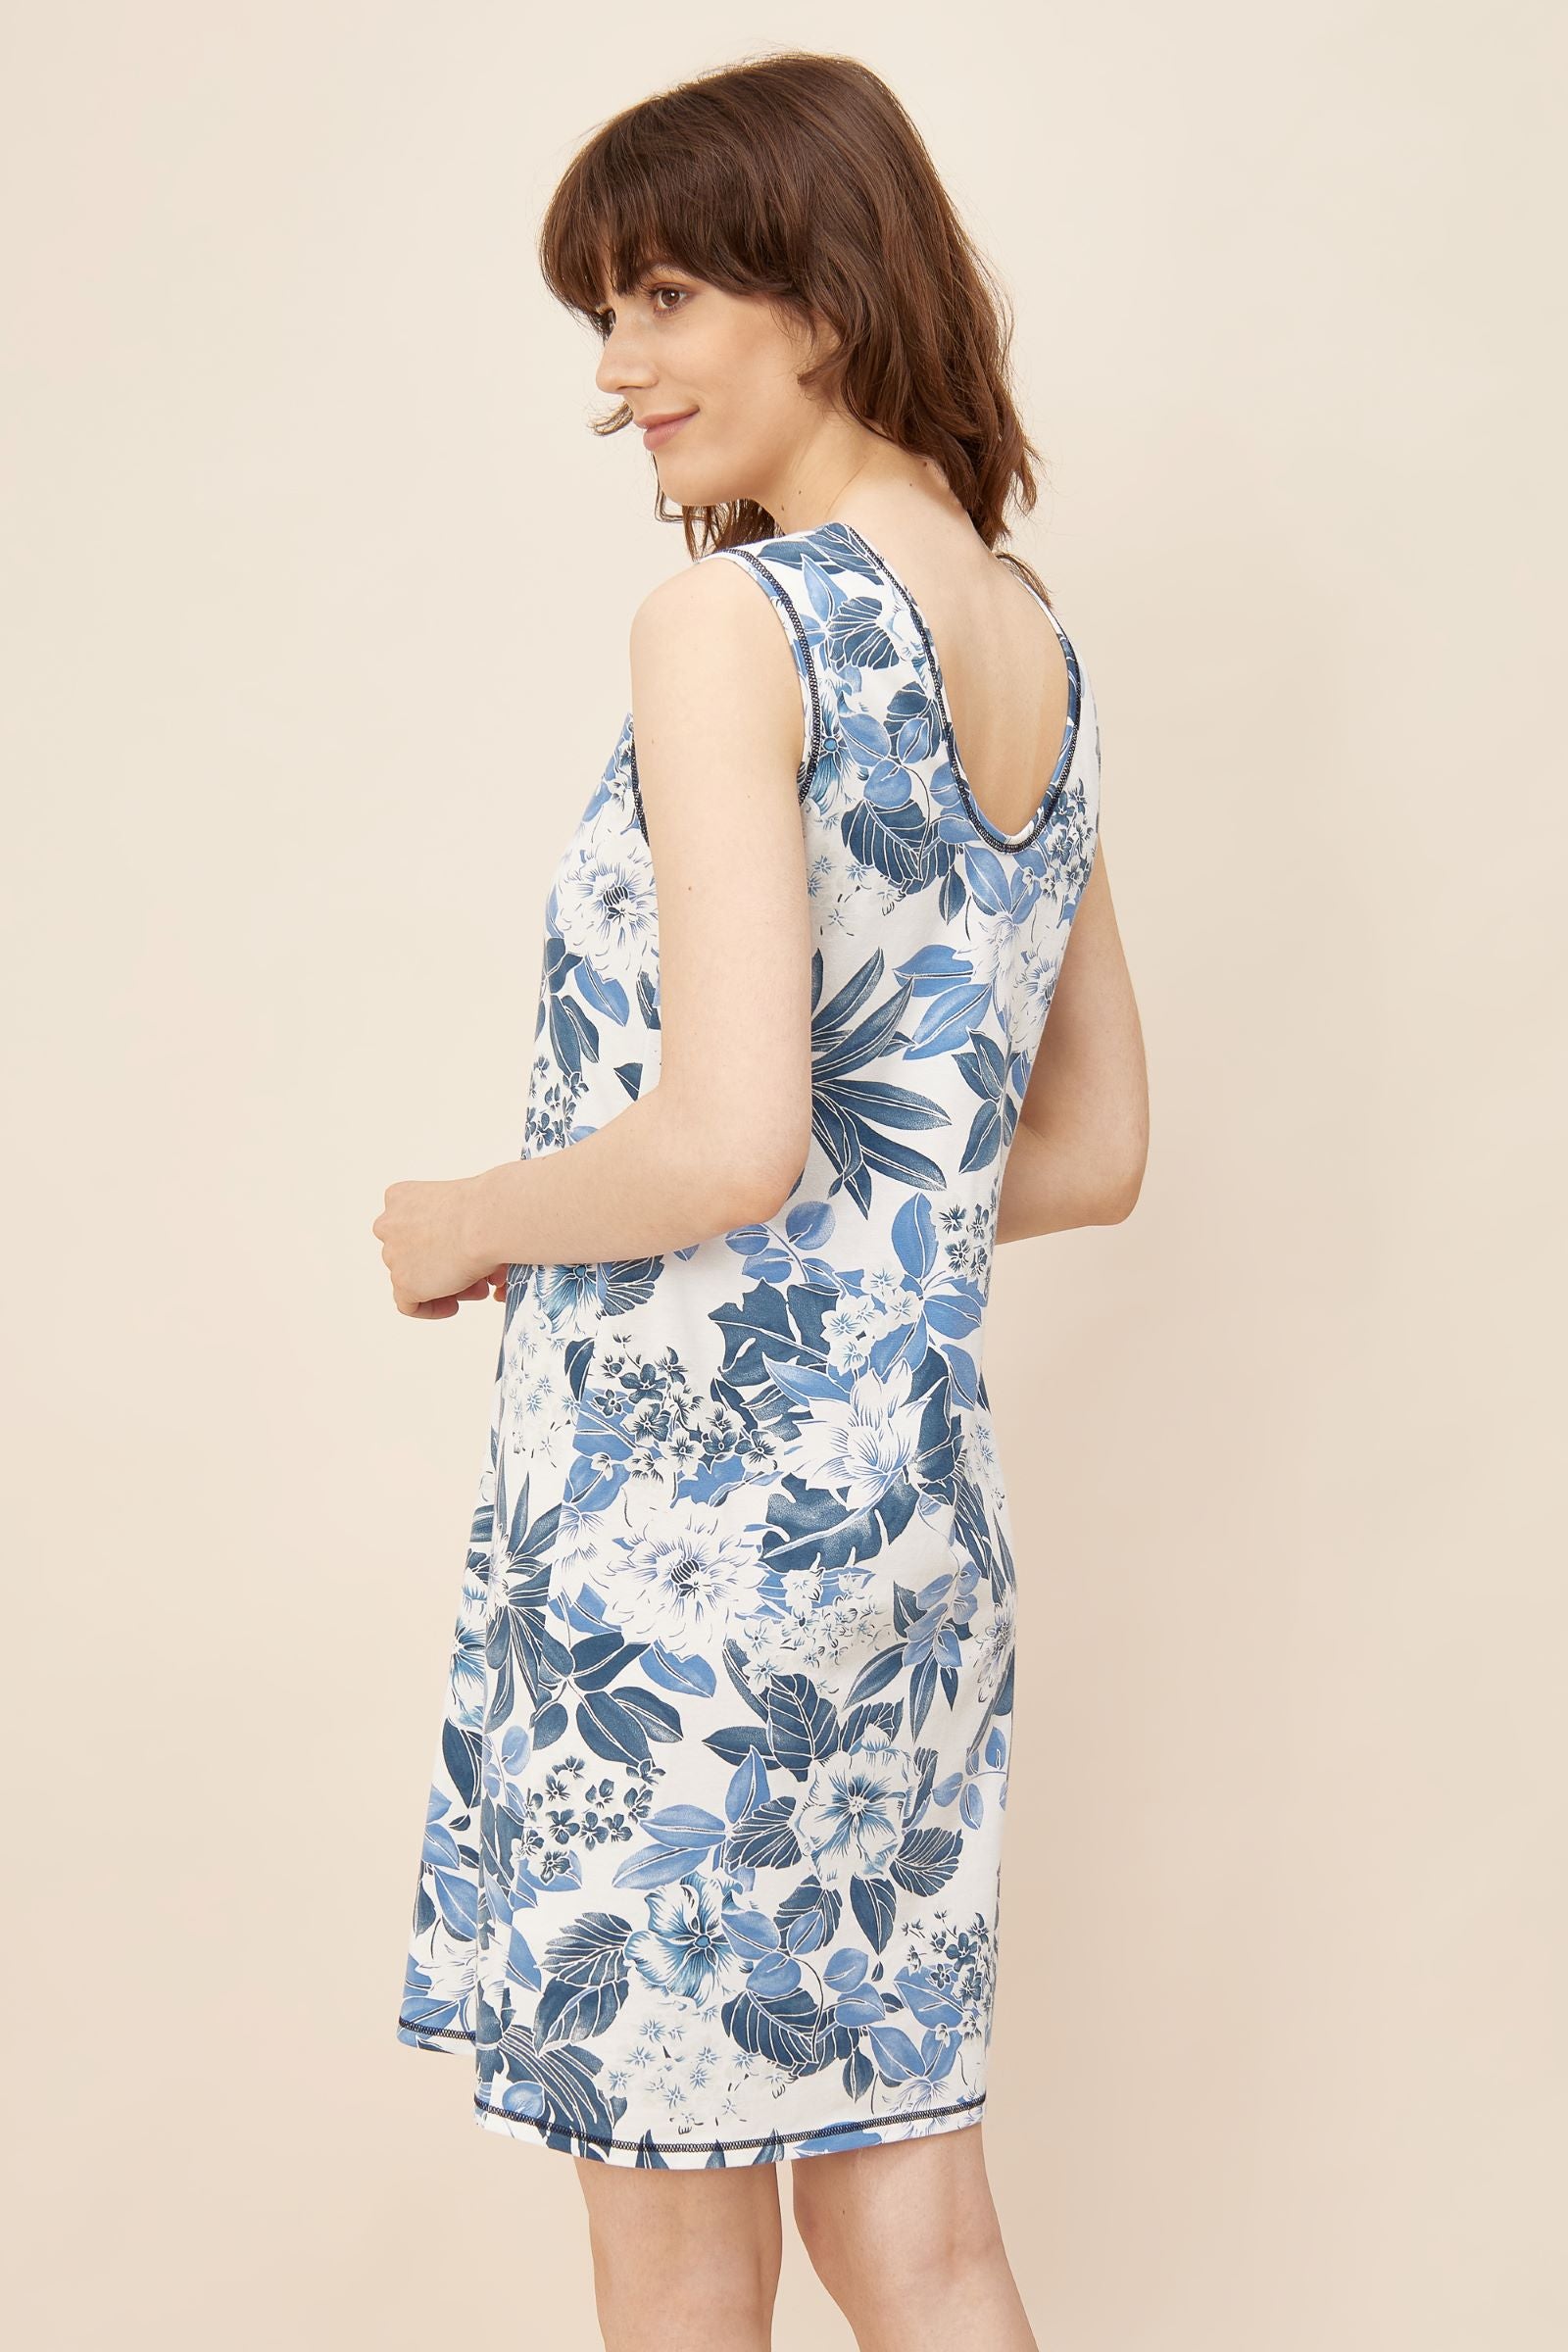 This nightgown from Rösch's Smart Casual collection is crafted from lightweight, supple single jersey cotton fabric, embellished with an indigo floral print. It is designed with a flattering, relaxed fit that ensures optimum comfort and ease of movement.  Sleeveless  Round-neck Stretchable cotton fabric The model is 176 cm tall and wears this item in a size M Made in EU, imported